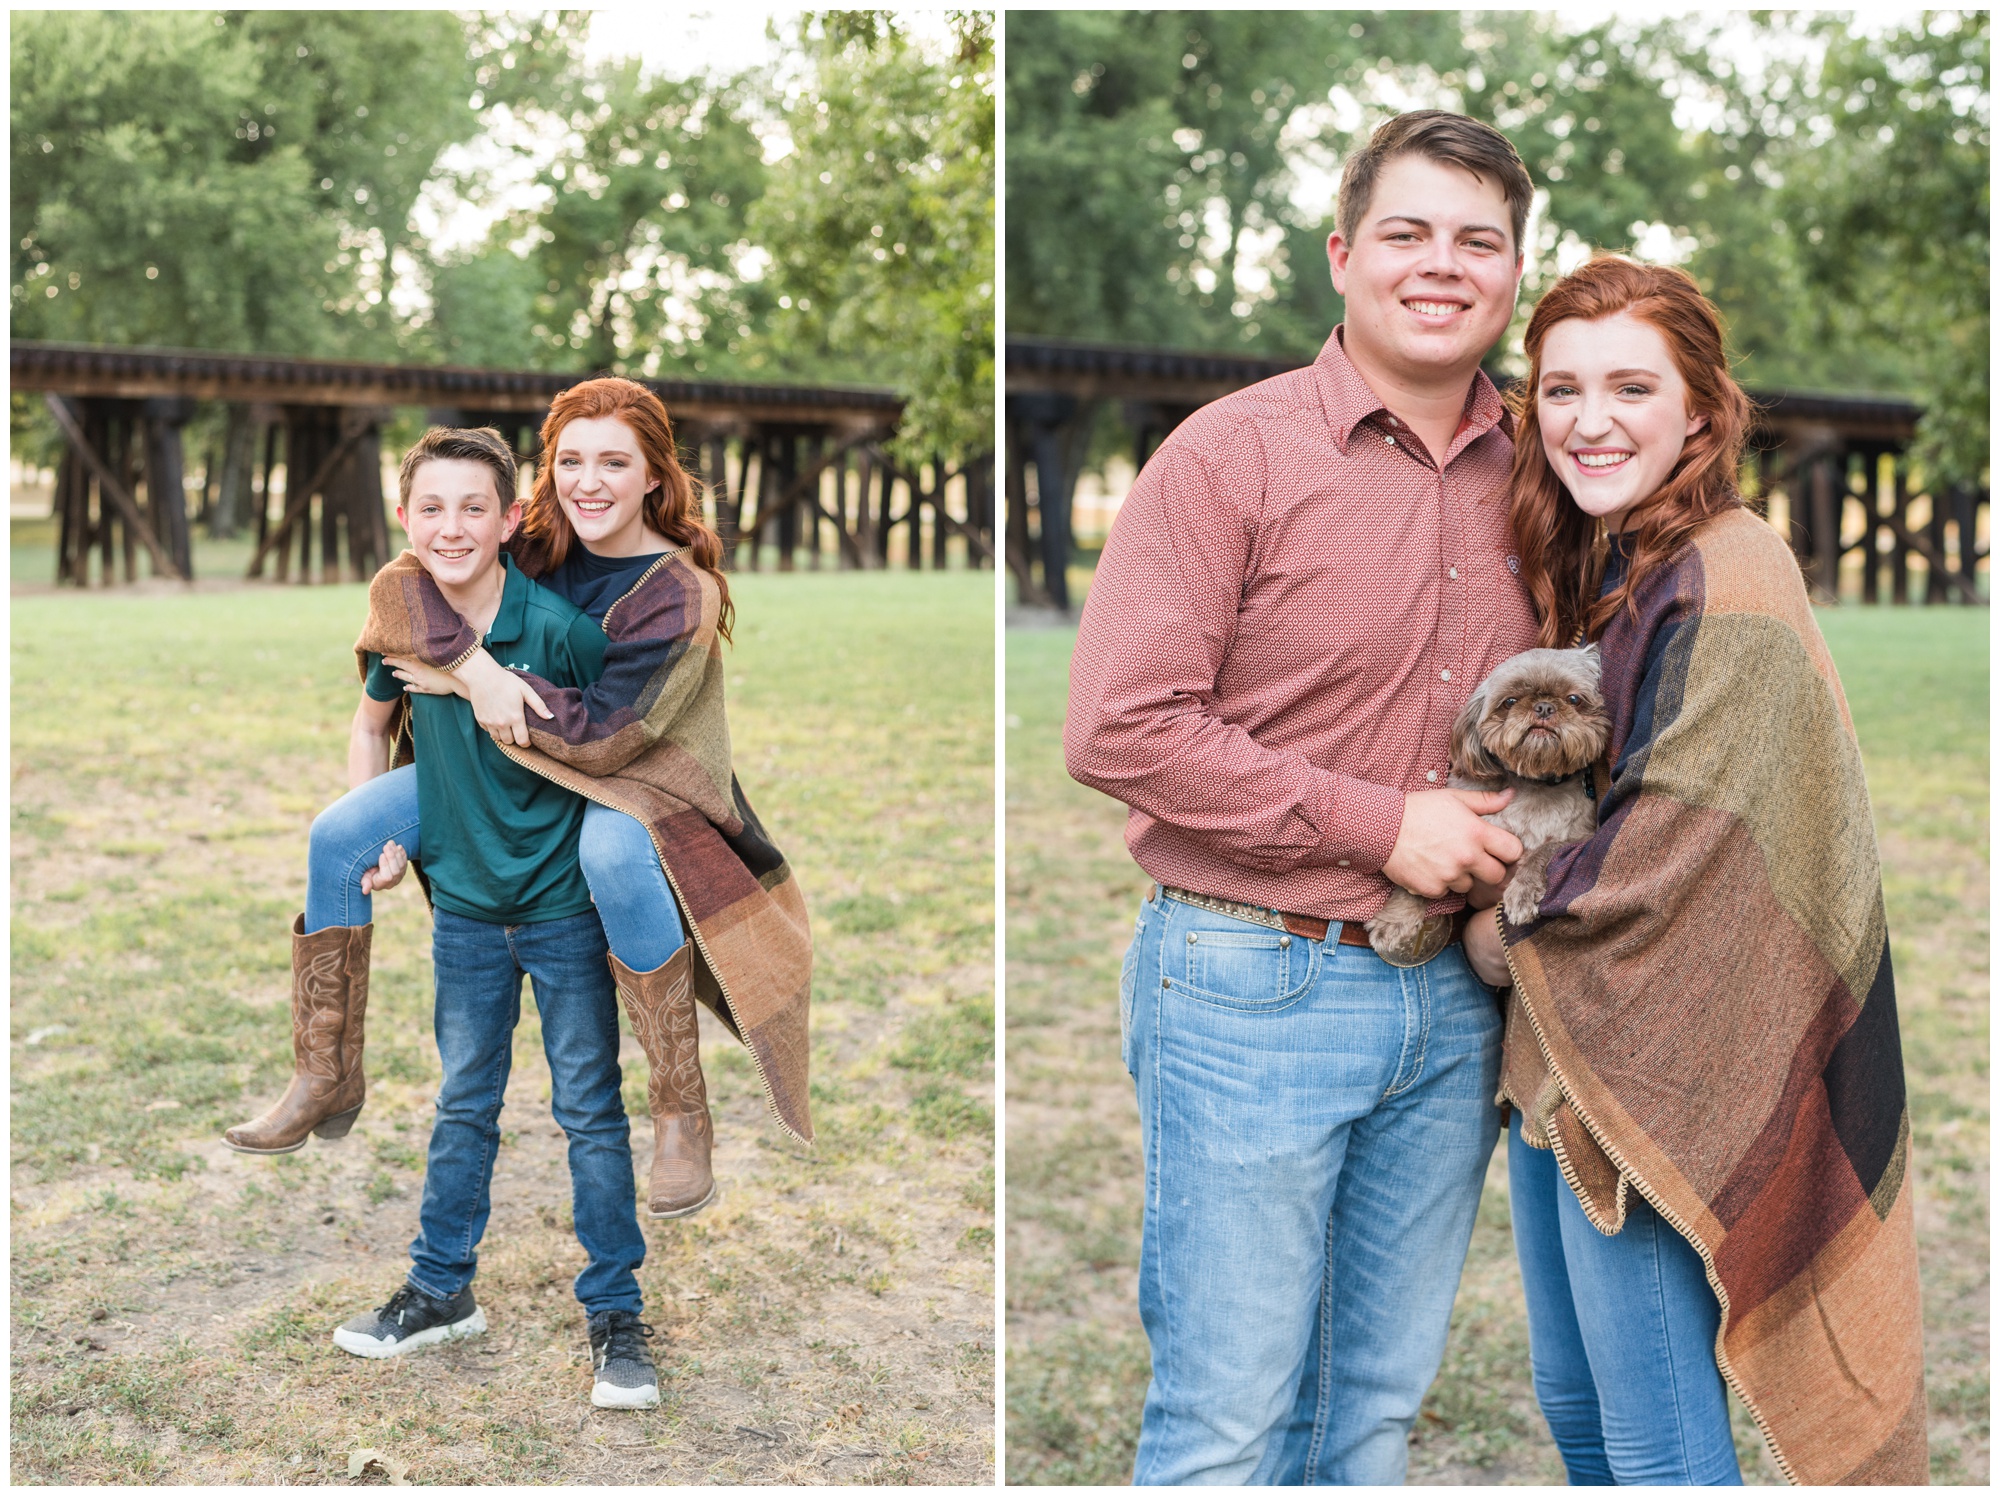 Fort Worth Trinity Park | Fort Worth Family Photographer | Fort Worth Family Session | Lauren Grimes Photography 